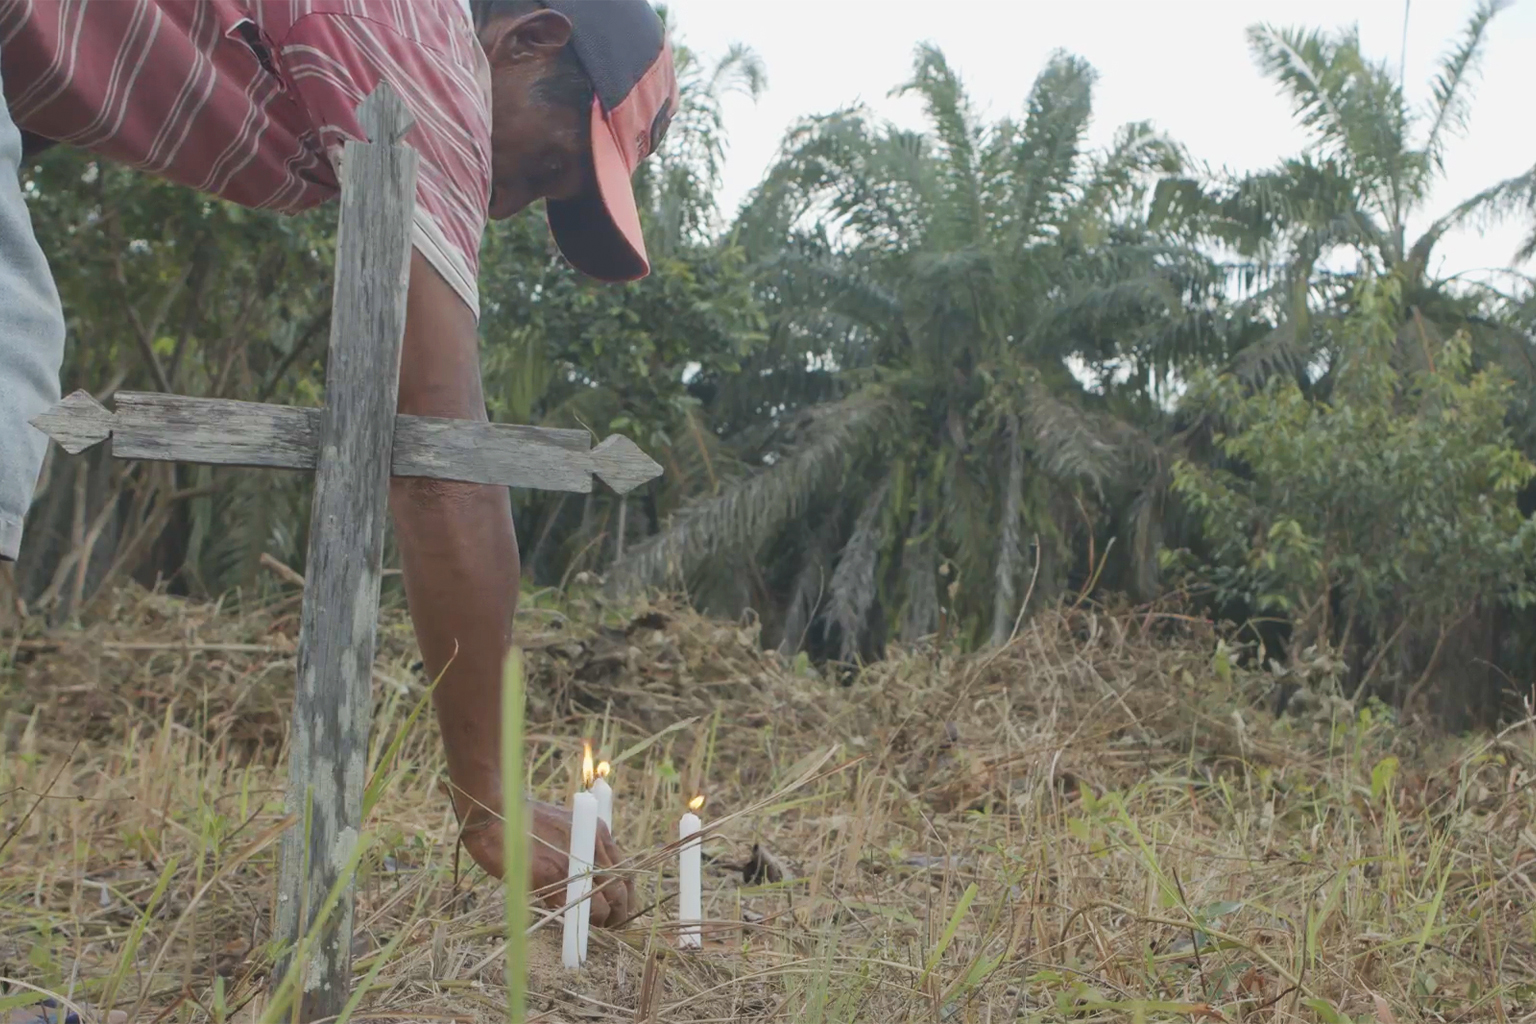 Indigenous laborer Francisco Neves Costa lights candles at a grave with oil palm trees in the background at the Livramento Cemetery. Image by Mongabay.